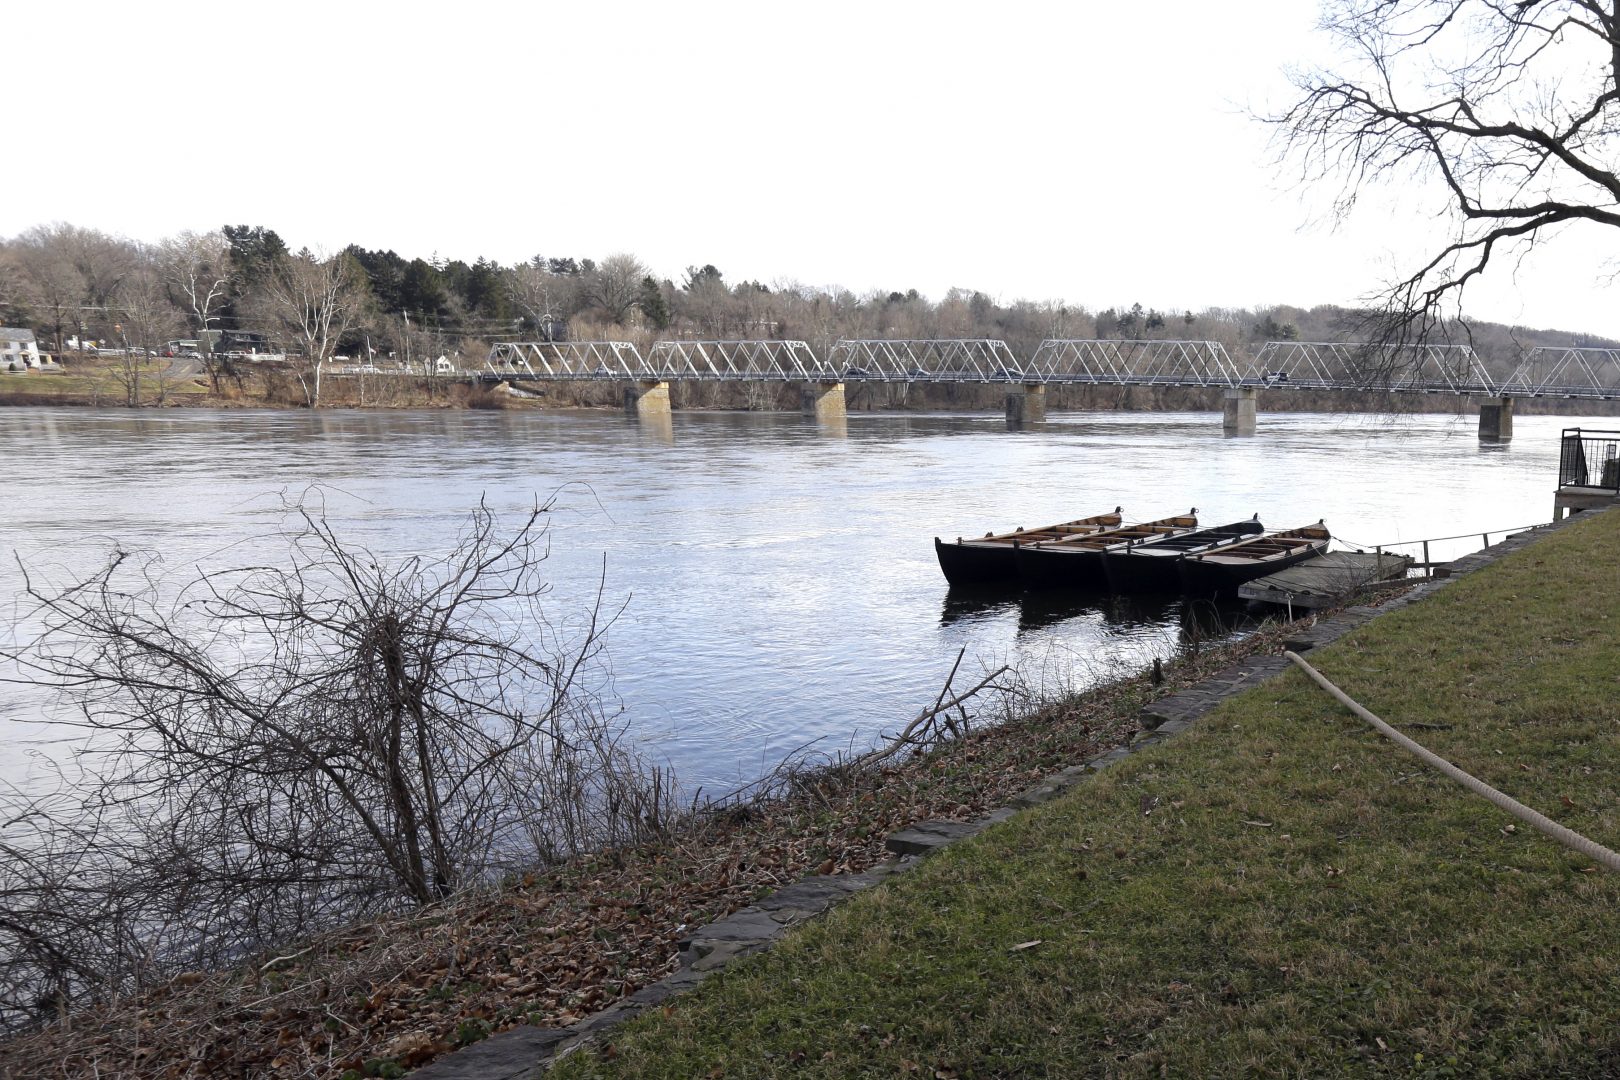 FILE - This Tuesday Dec. 25, 2018 file photo shows the Delaware River at Washington Crossing, Pa. On Thursday, Feb. 25, 2021, the Delaware River Basin Commission voted to permanently ban natural gas drilling and fracking in the watershed.  